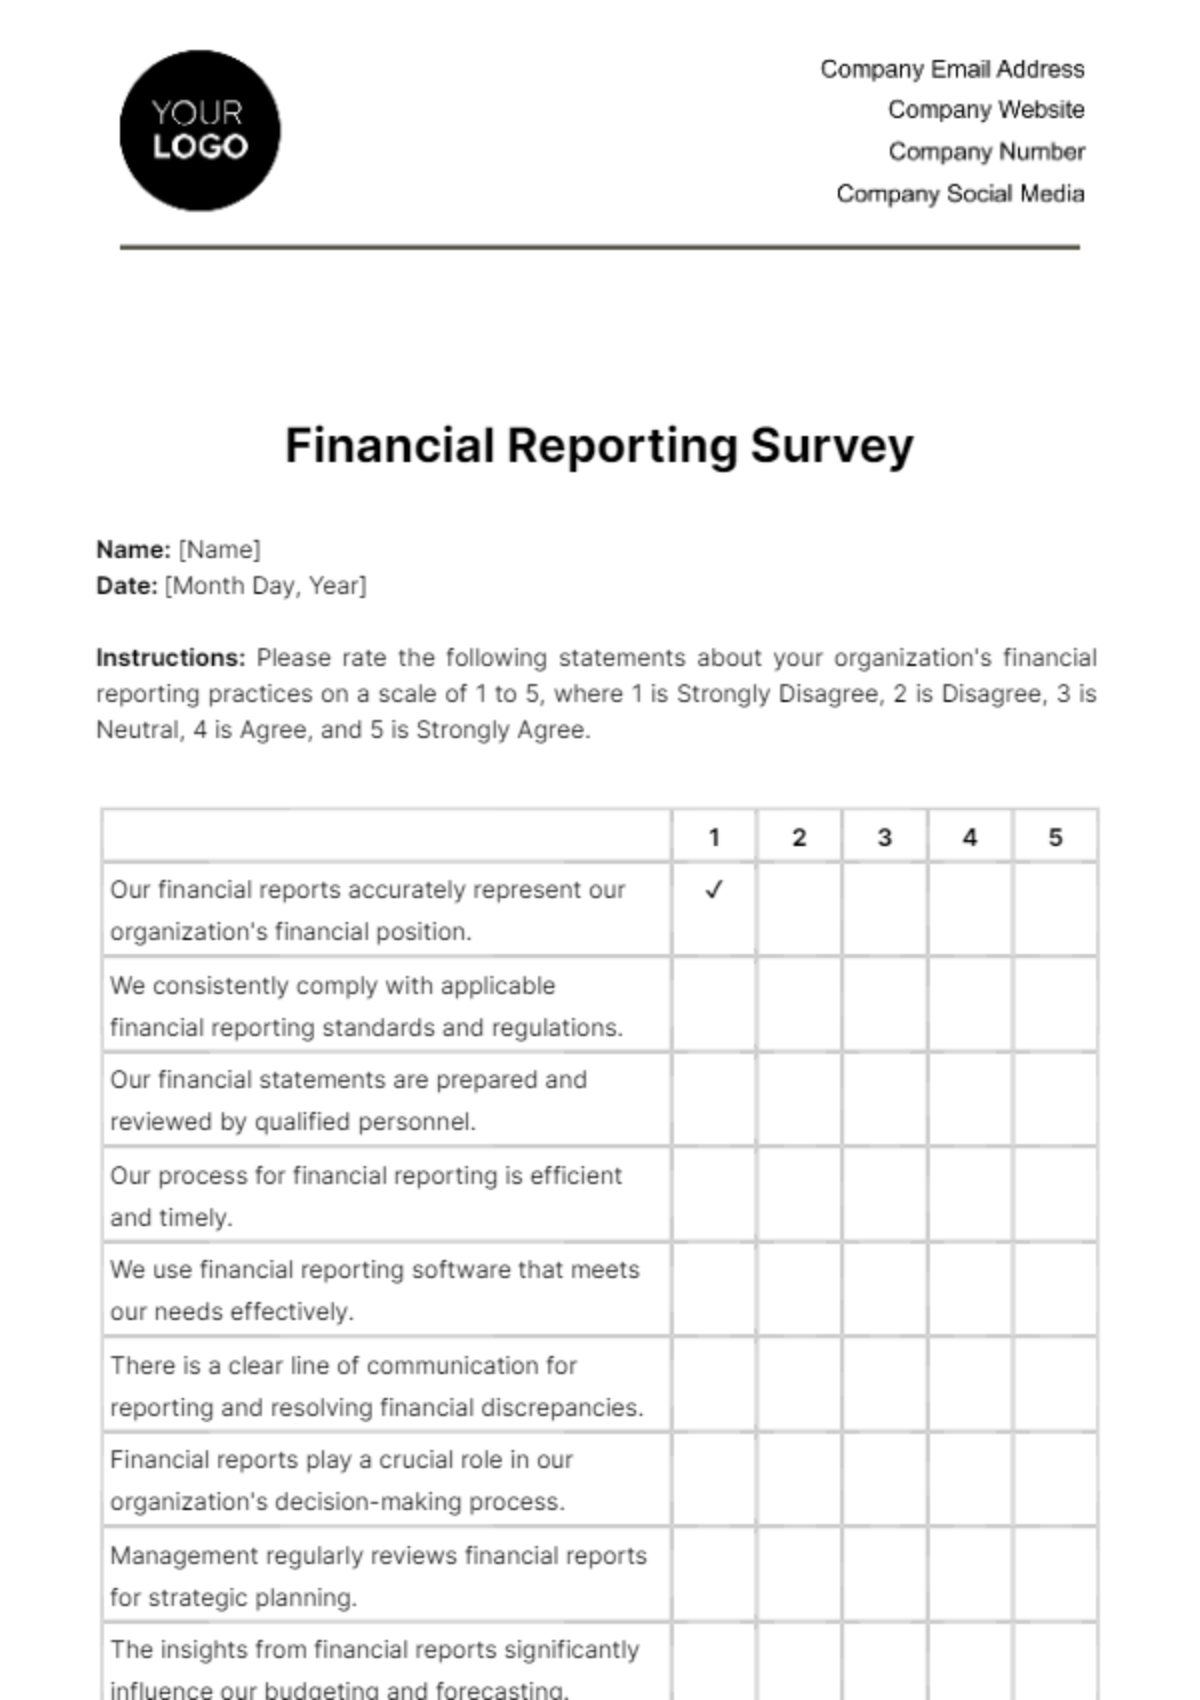 Free Financial Reporting Survey Template